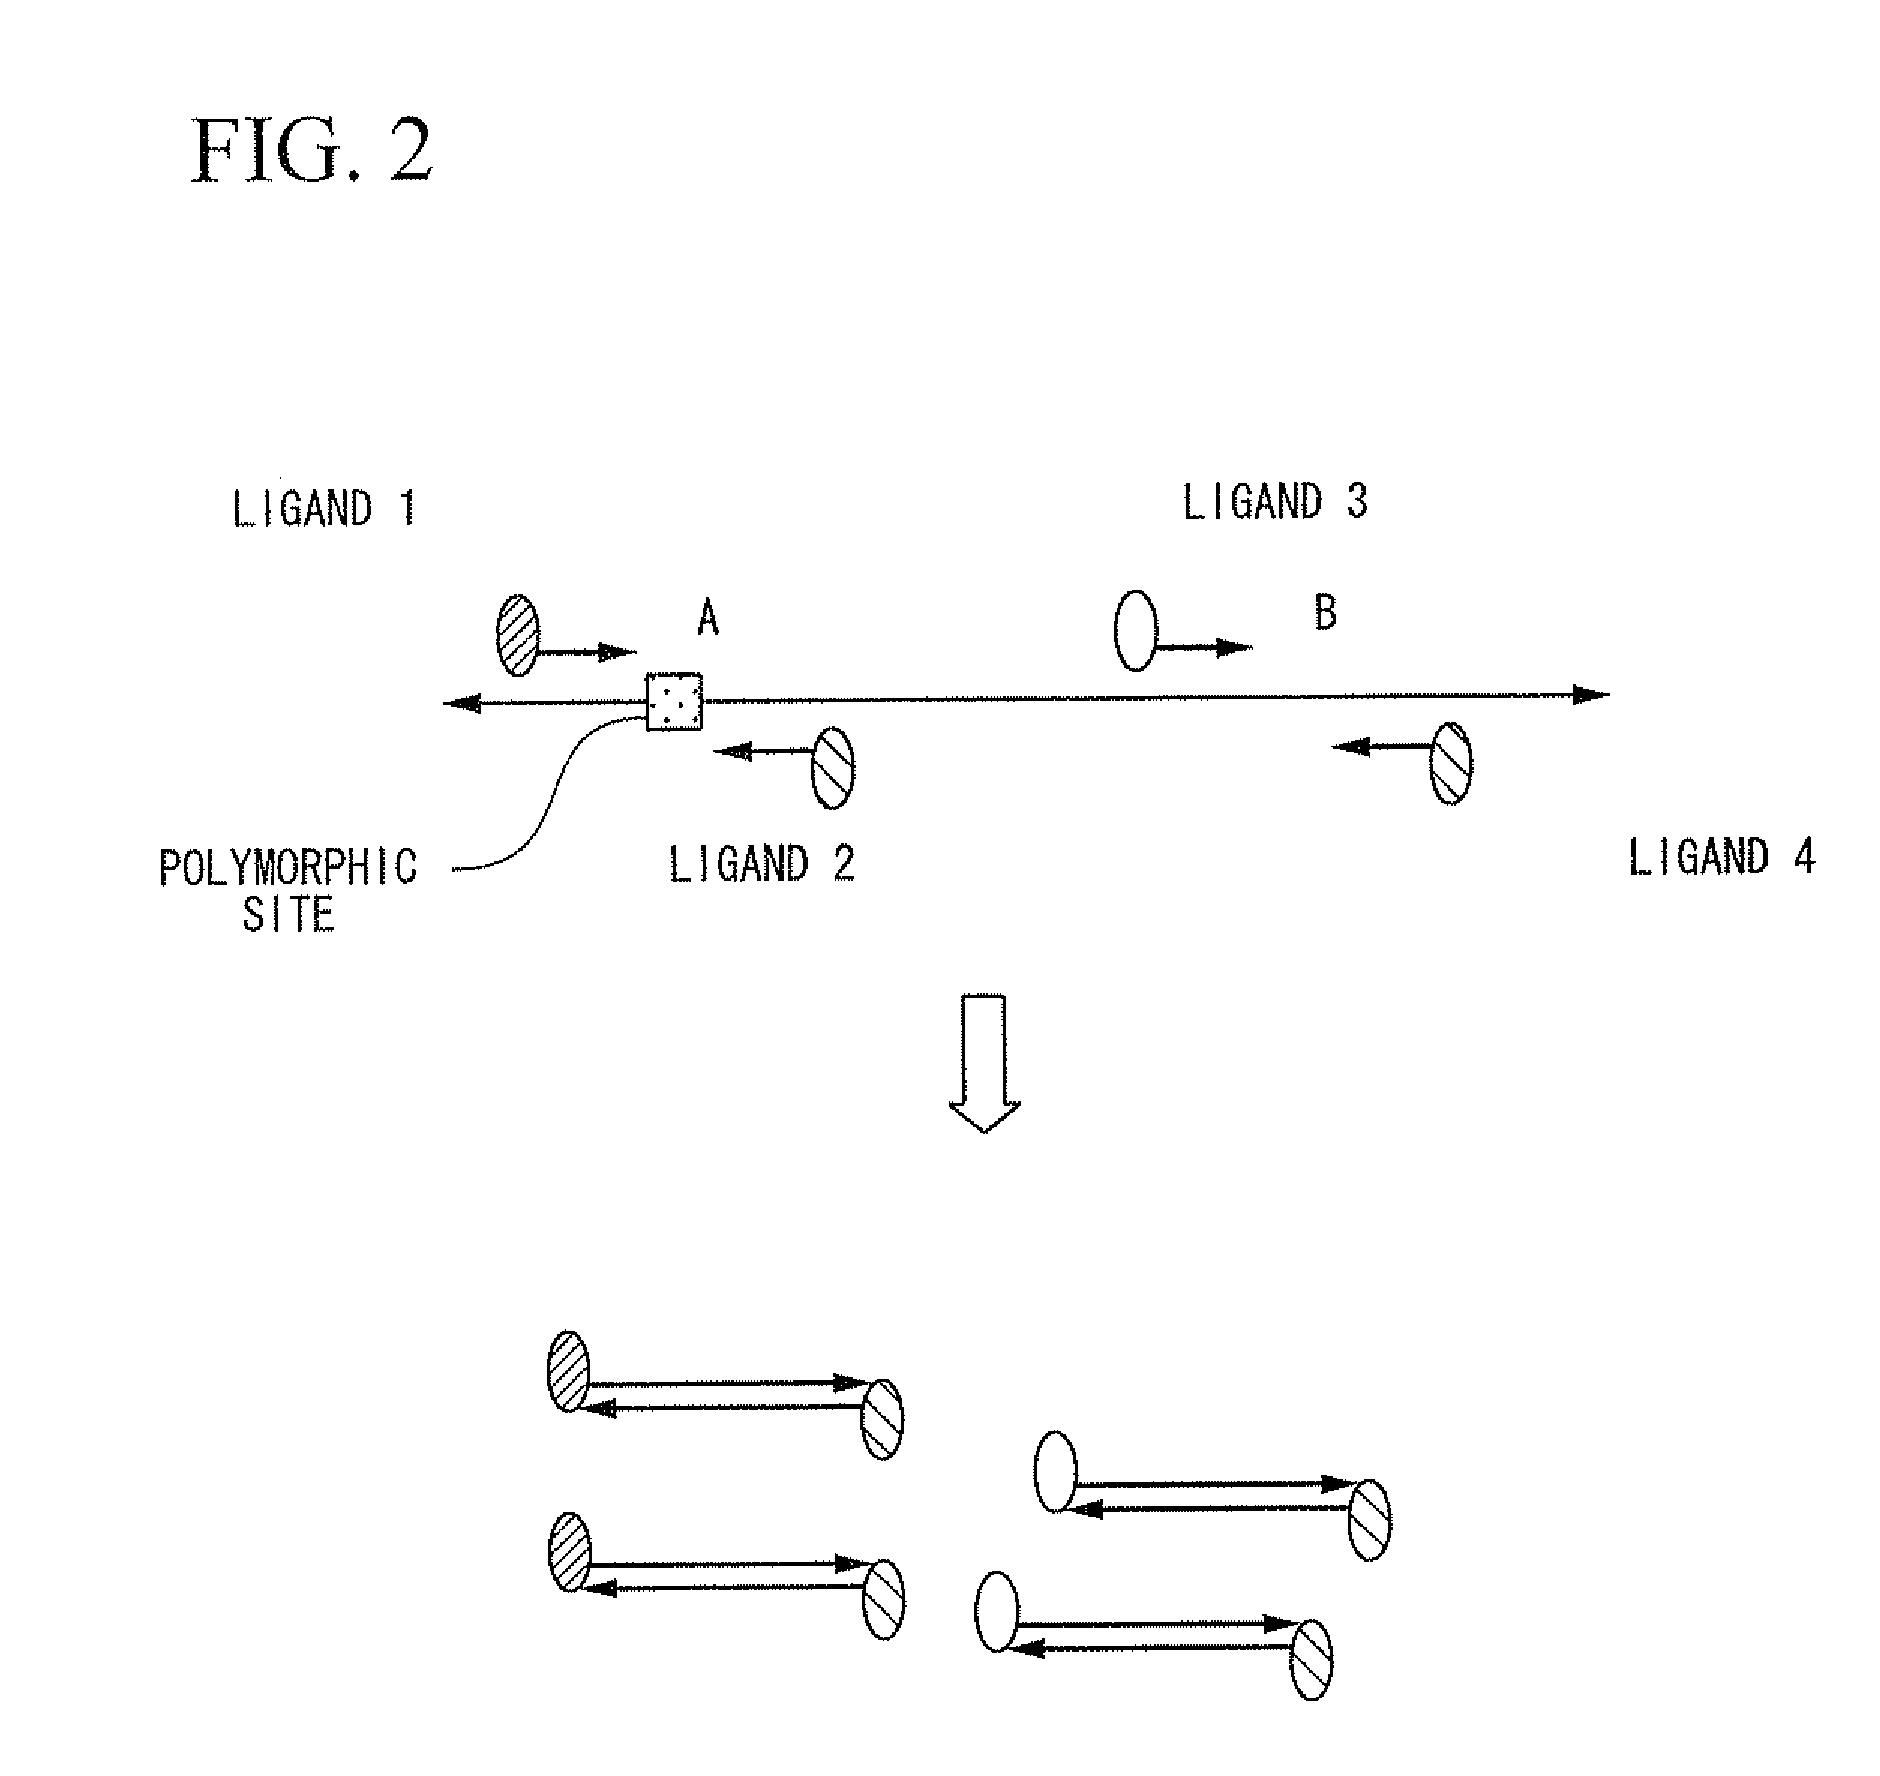 Method of analysis of primary structural change of nucleic acid